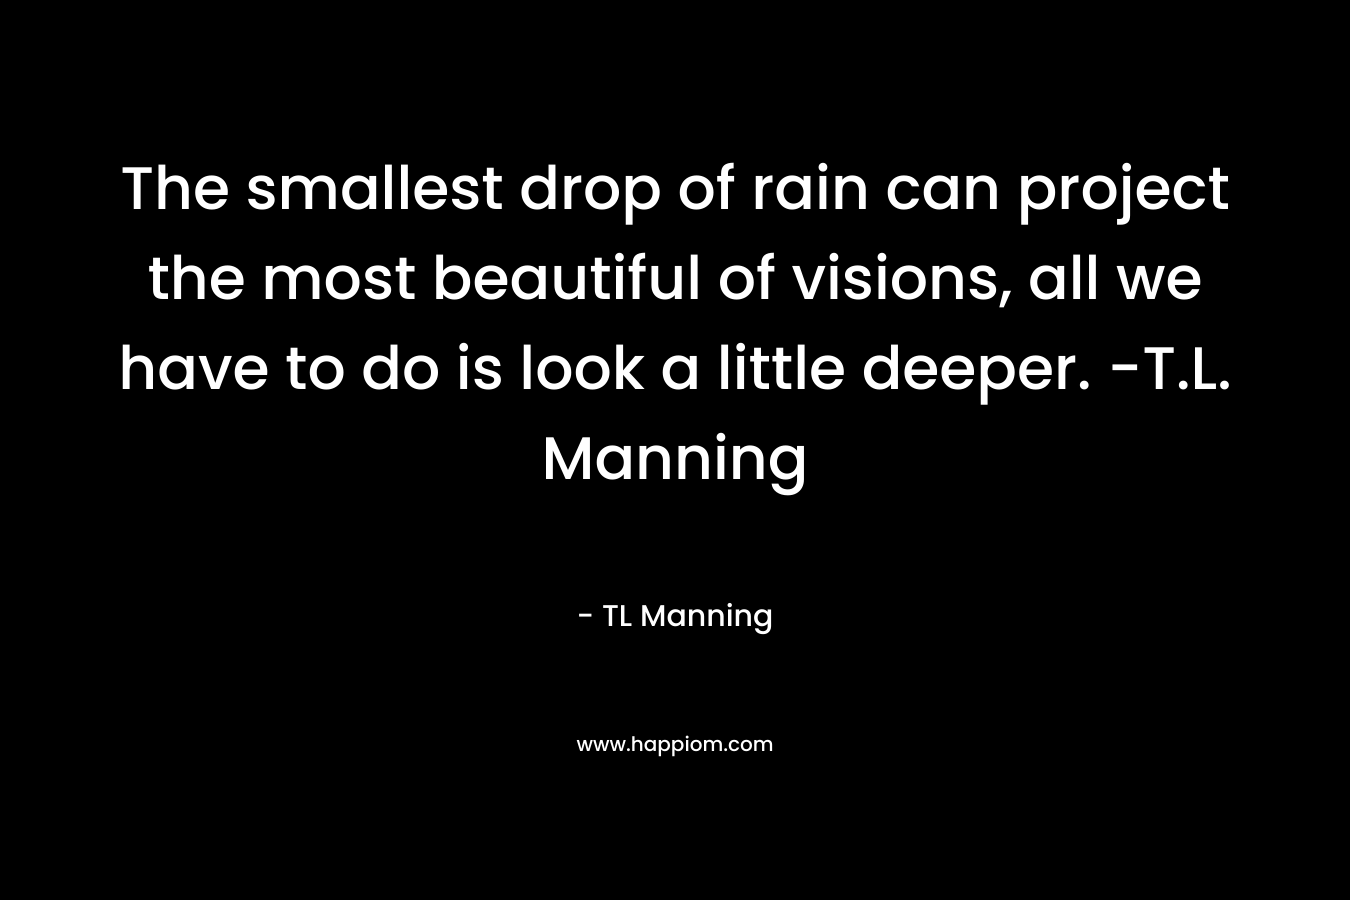 The smallest drop of rain can project the most beautiful of visions, all we have to do is look a little deeper. -T.L. Manning